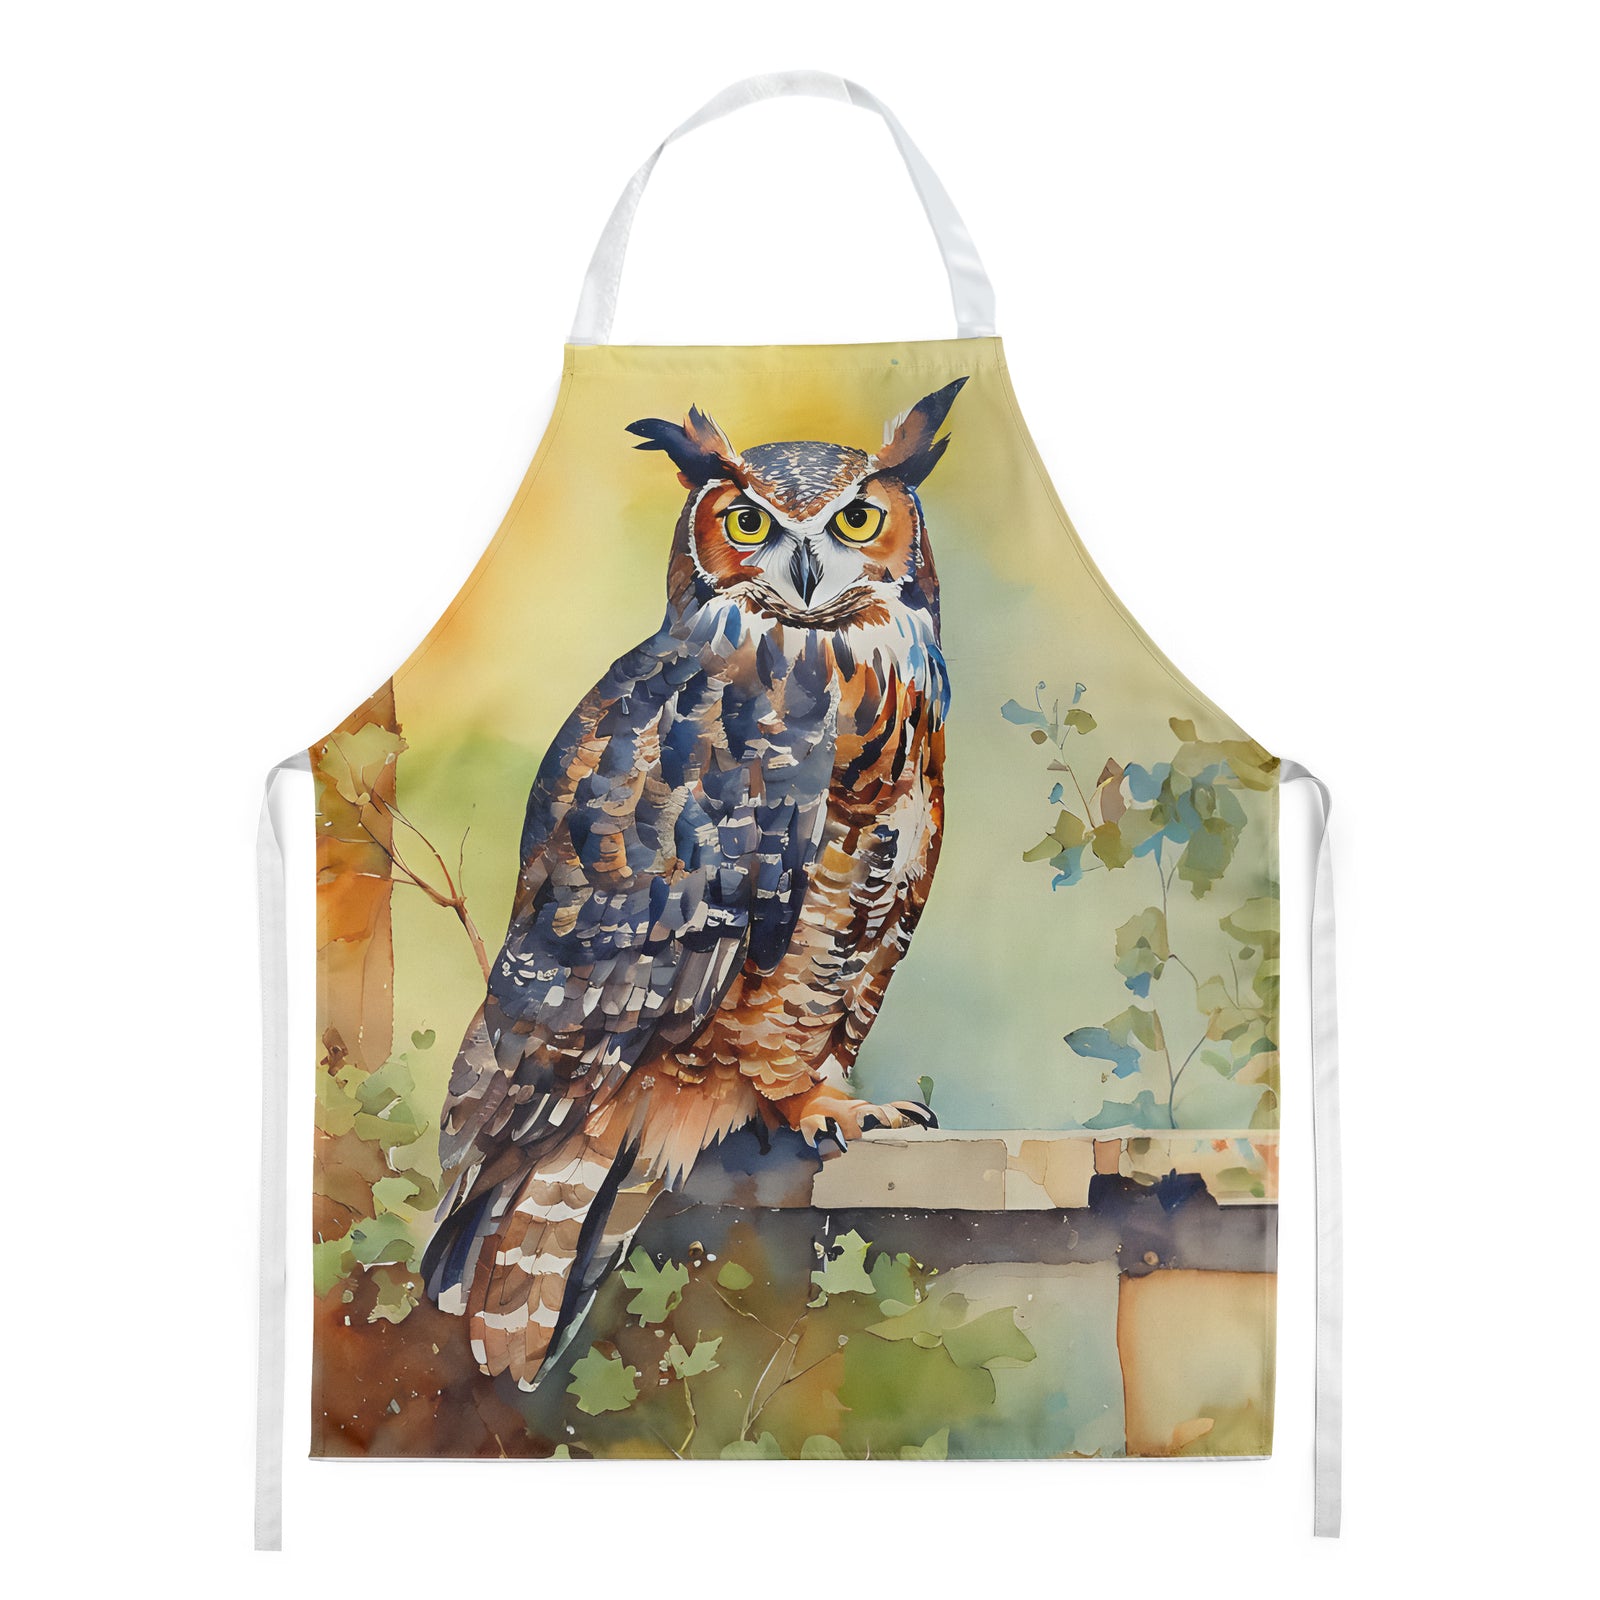 Buy this Great Horned Owl Apron